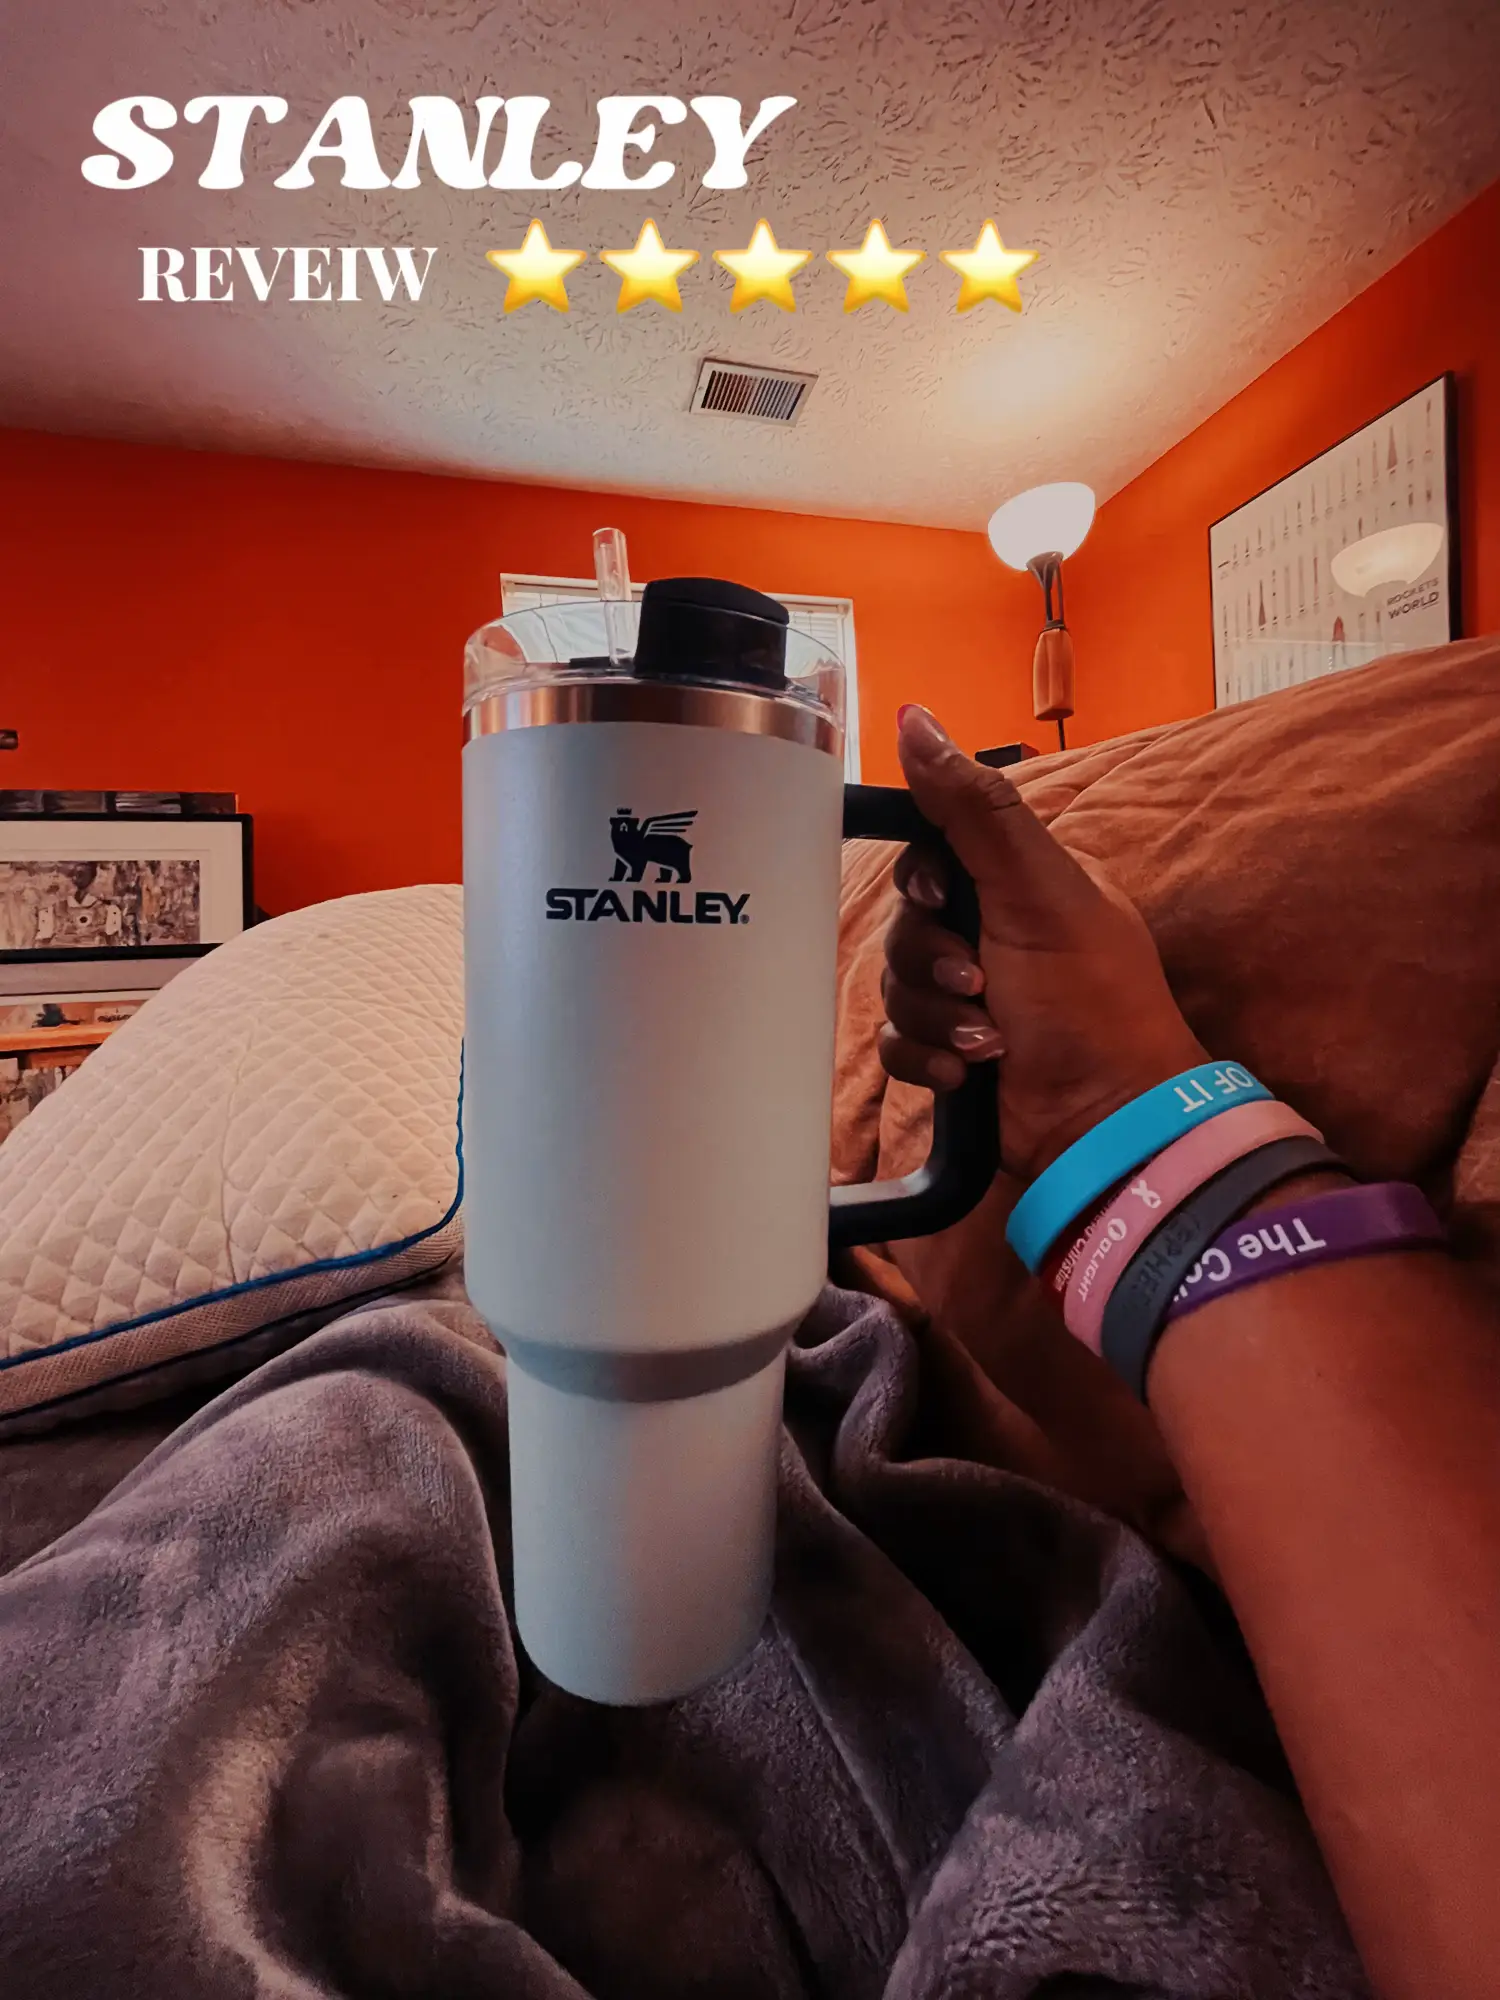 Got the stanley #stanleycup #review #target #tumbler